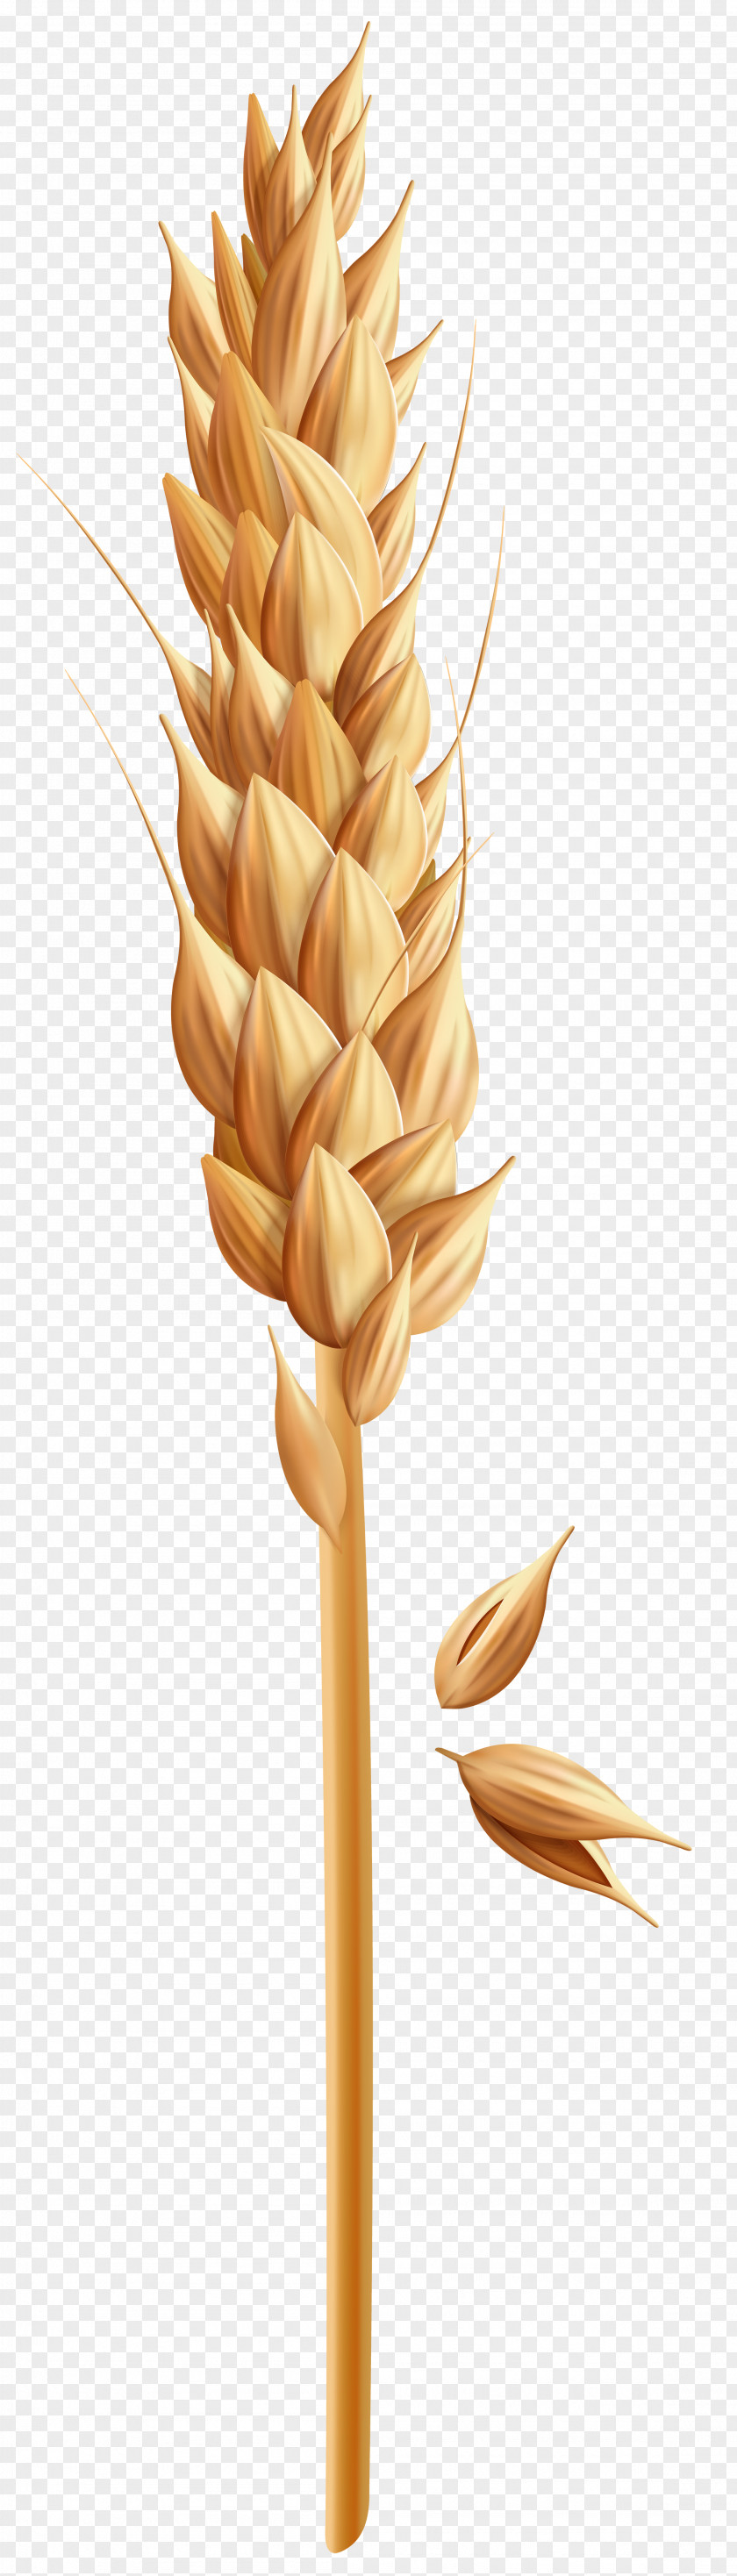 Wheat Clip Art Cereal Image PNG